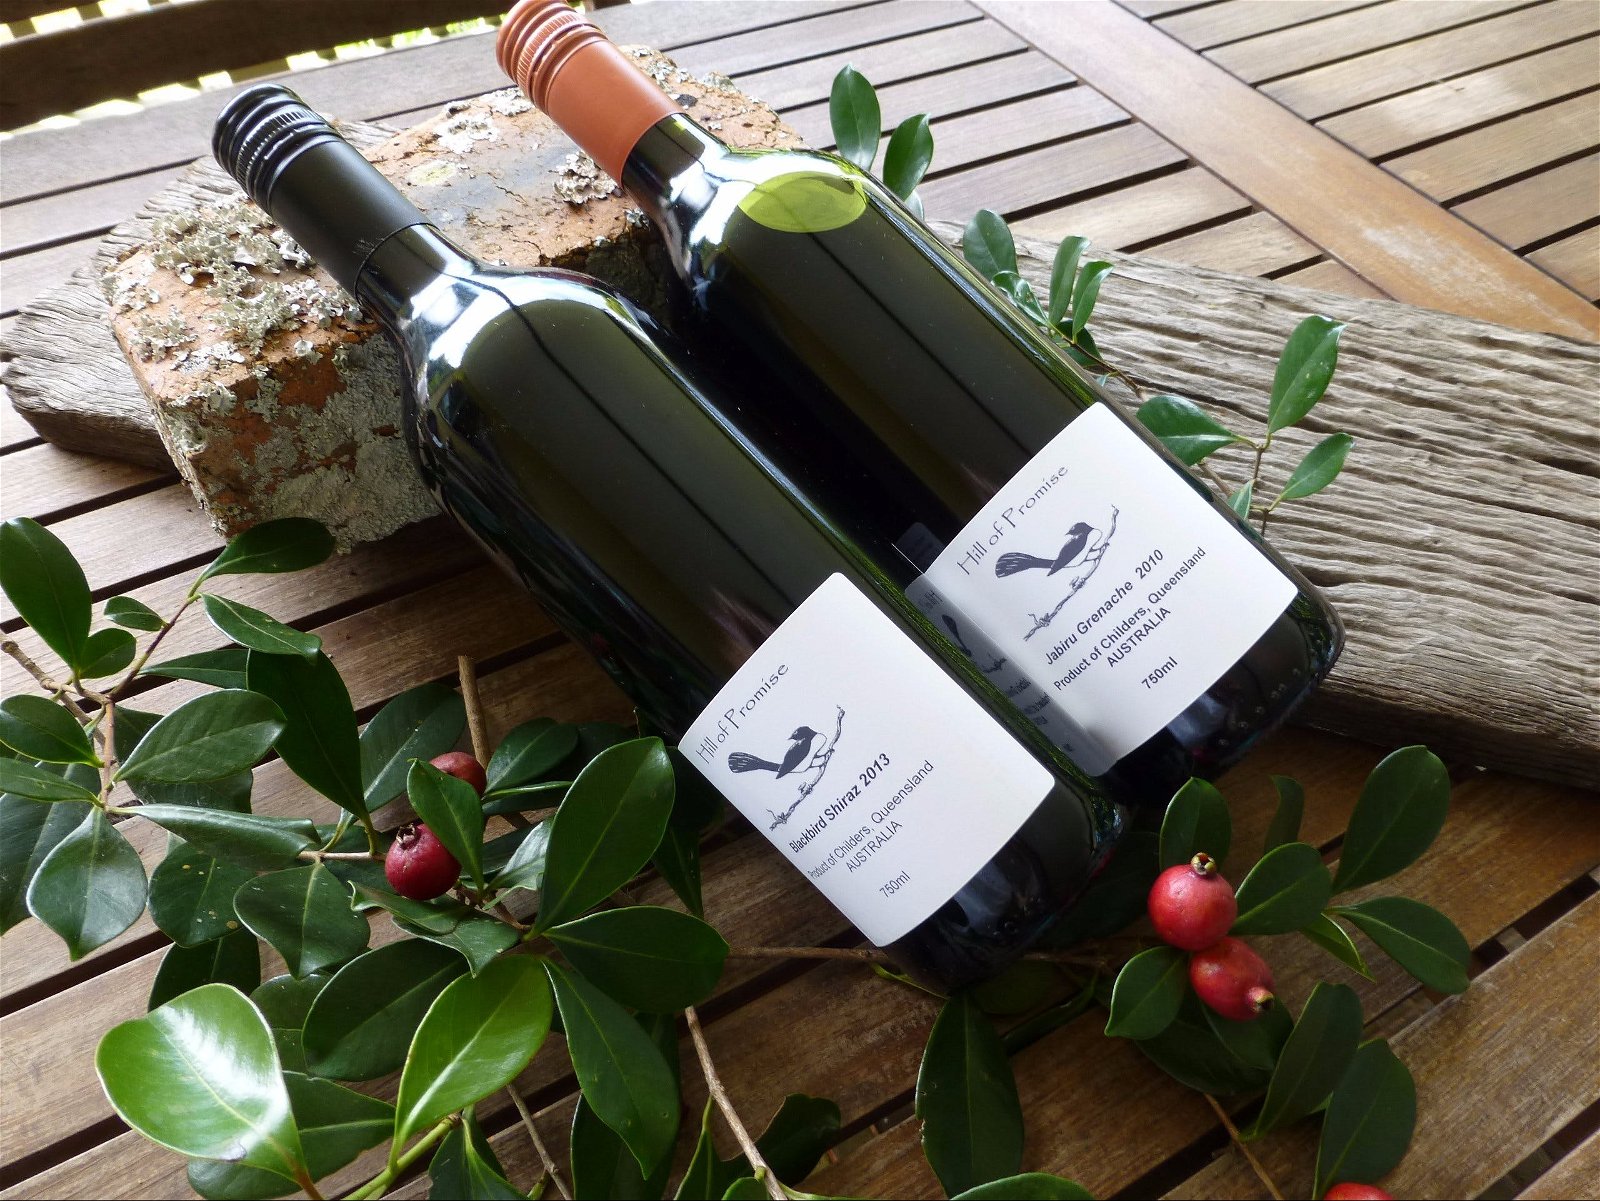 Hill of Promise Winery and Cellar Door - Food Delivery Shop